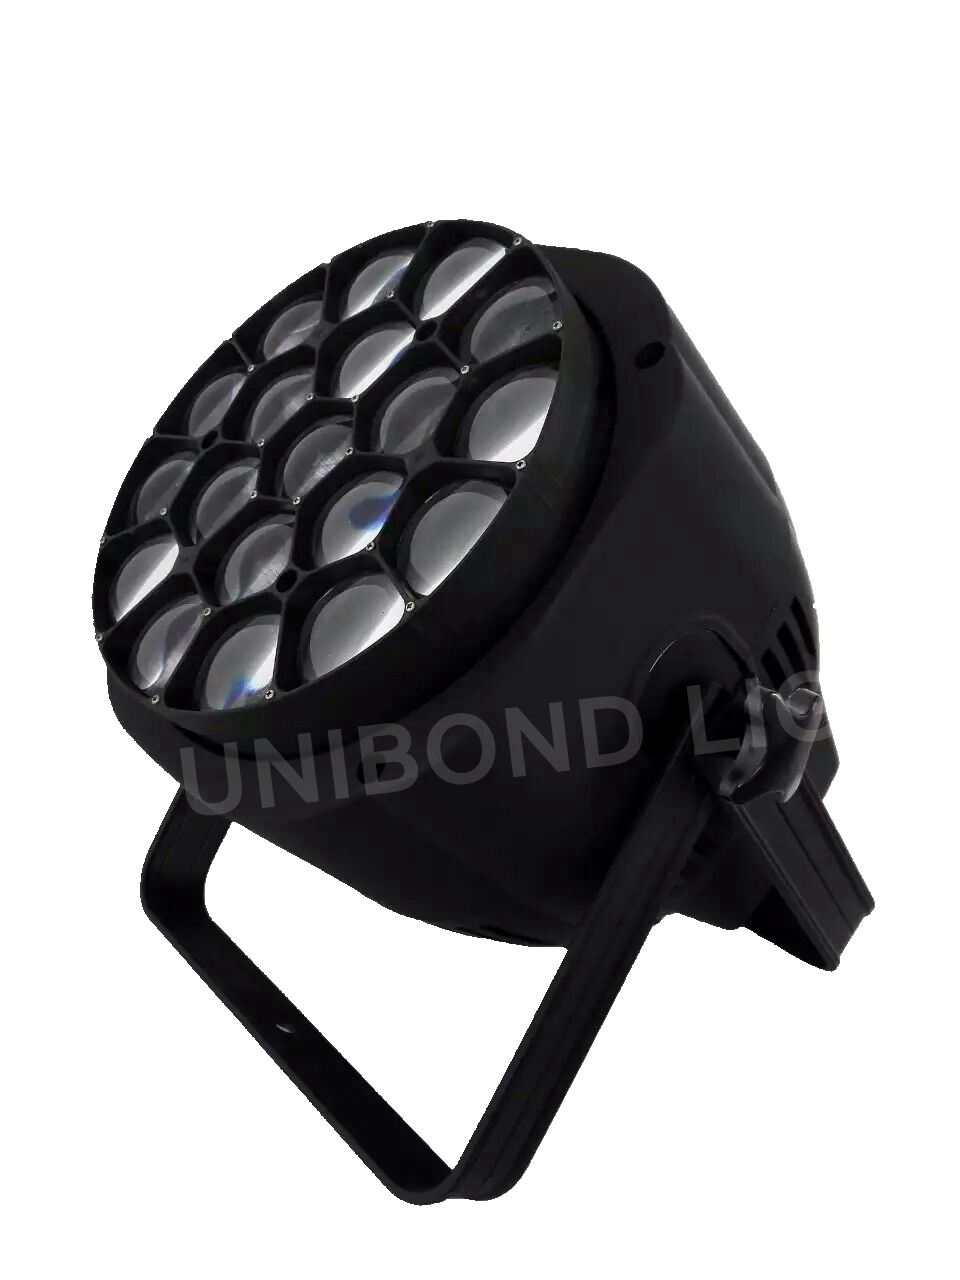 LED 19*15W RGBW 4 in 1 Beeye PAR Light with Zoom Stage Light Disco Light Party Light